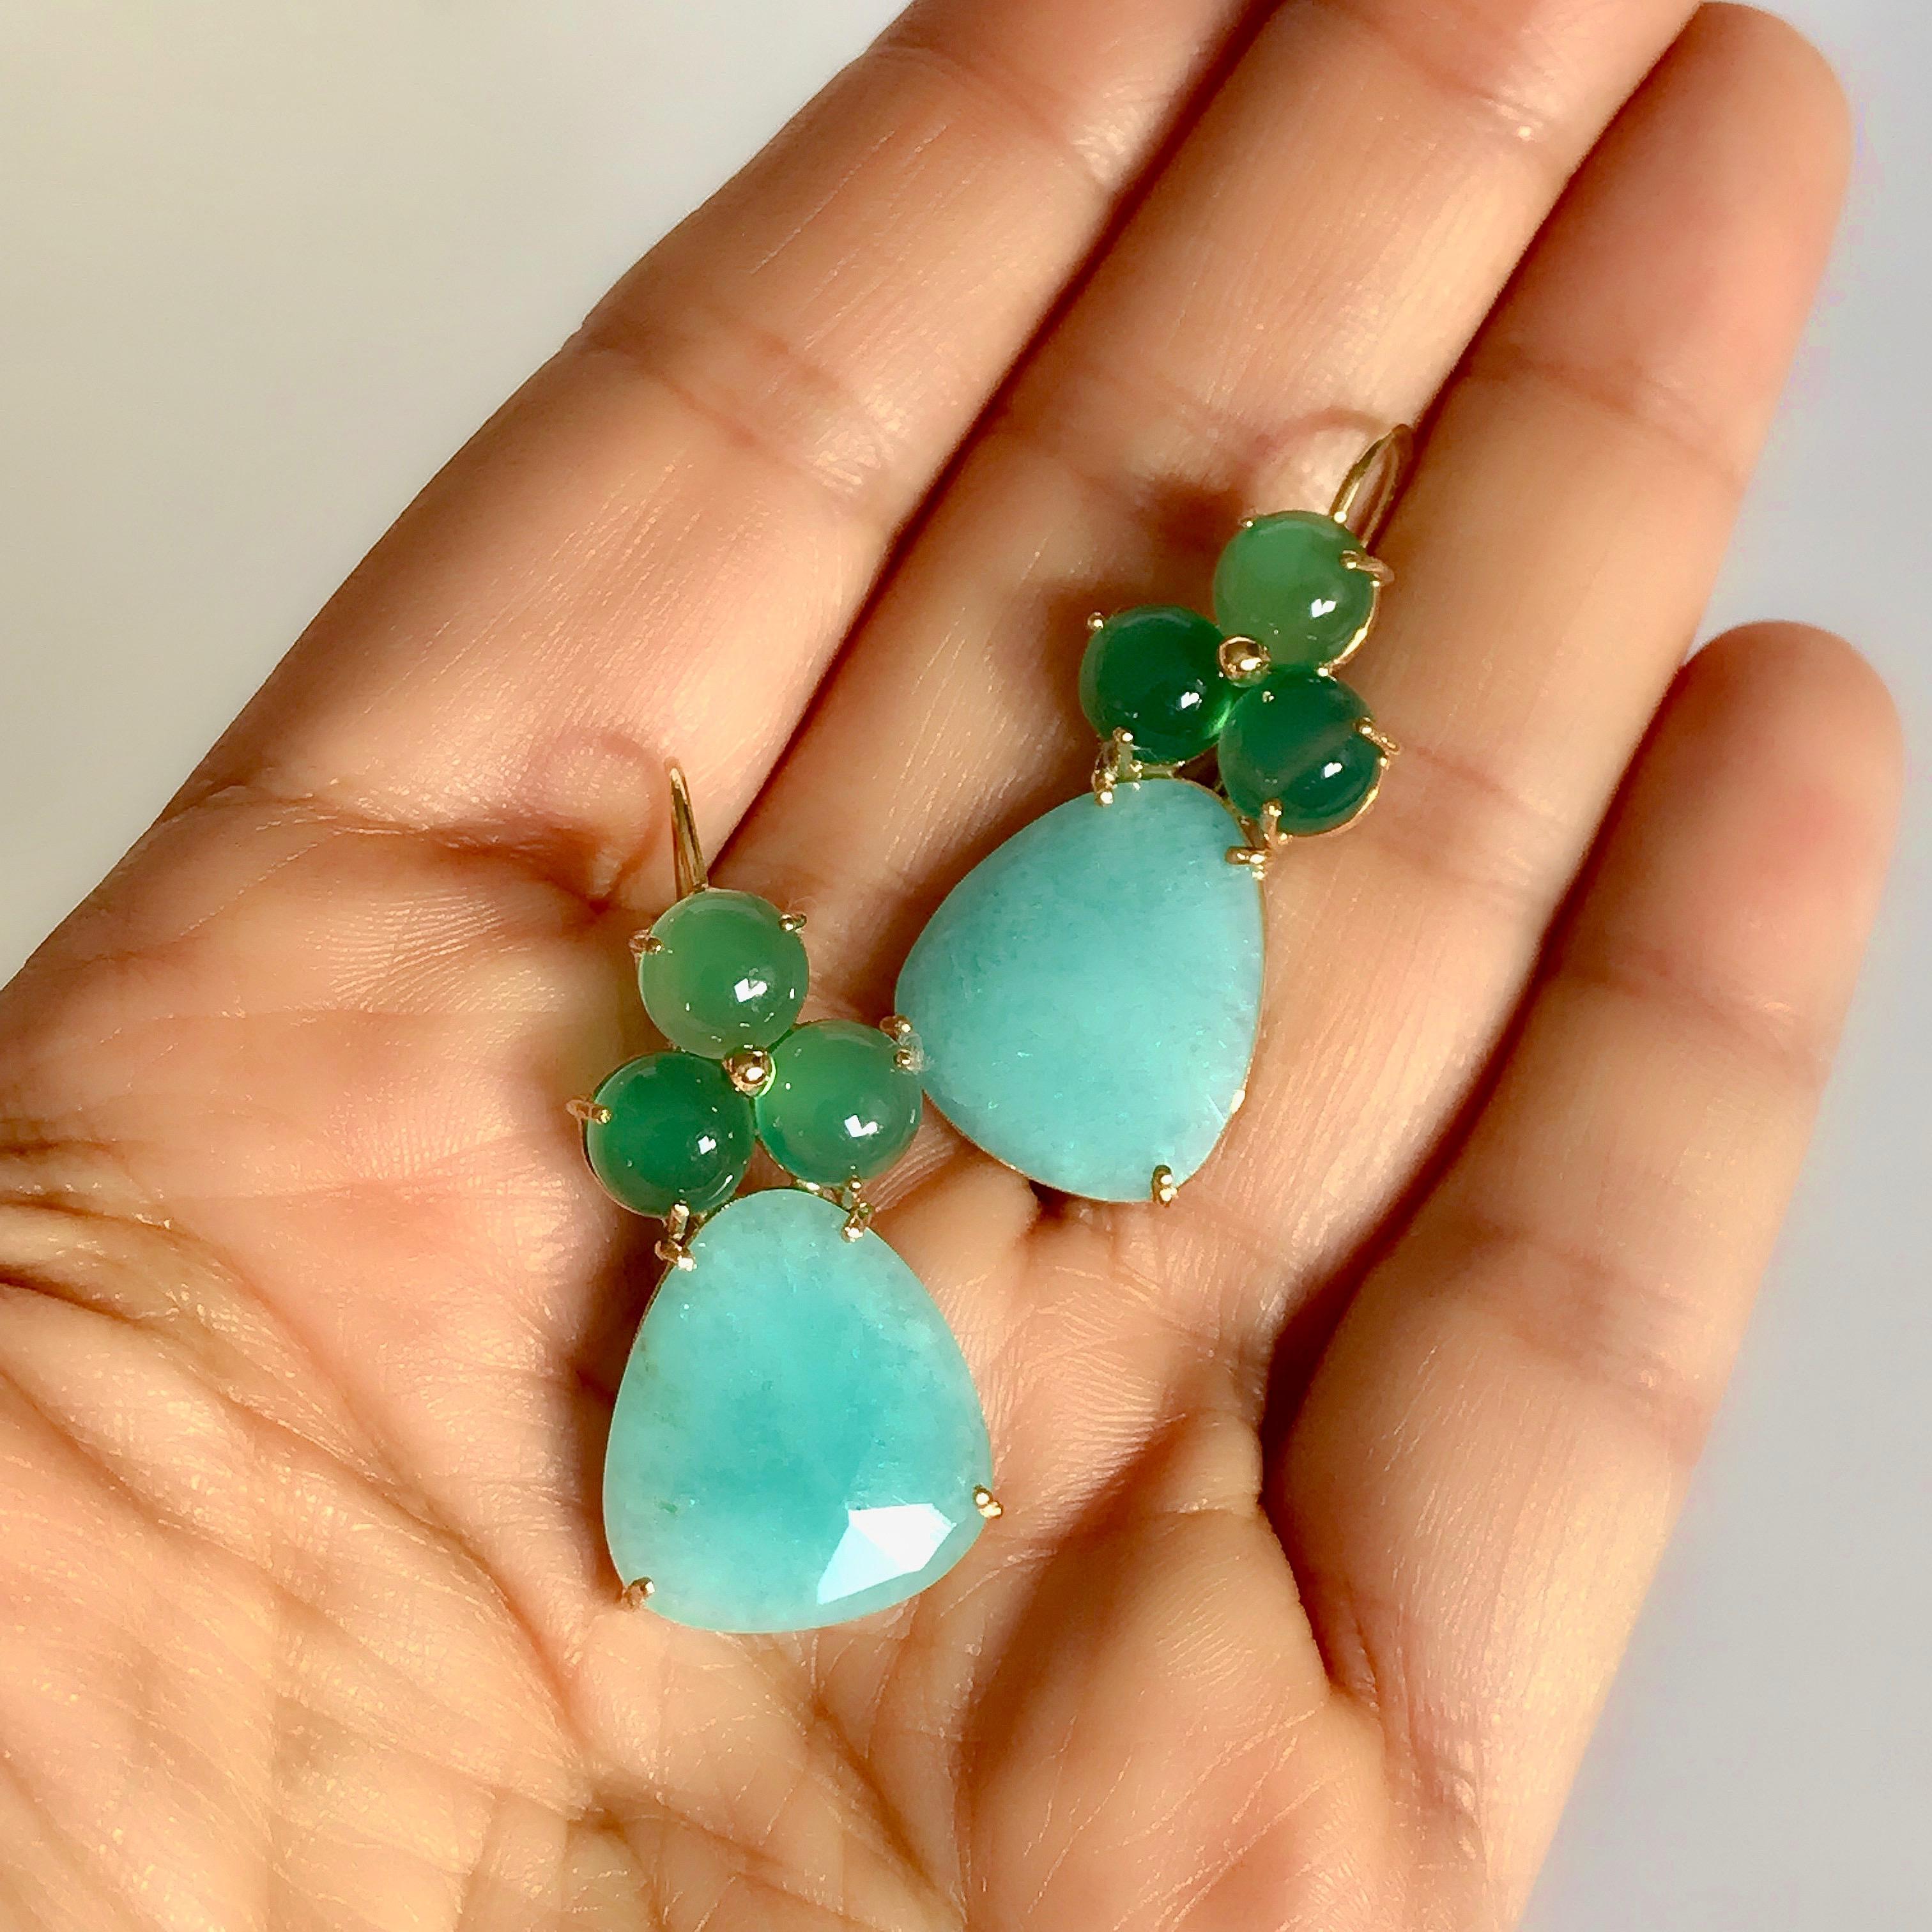 Handcrafted hook drop earrings, made of 18 karat solid yellow gold, cabochon-cut green agates and rose-cut amazonite.
Easy to wear, suitable for almost any occasion. 
Hallmarked at London Goldsmiths’ Company – Assay Office ( laser mark on the pins )